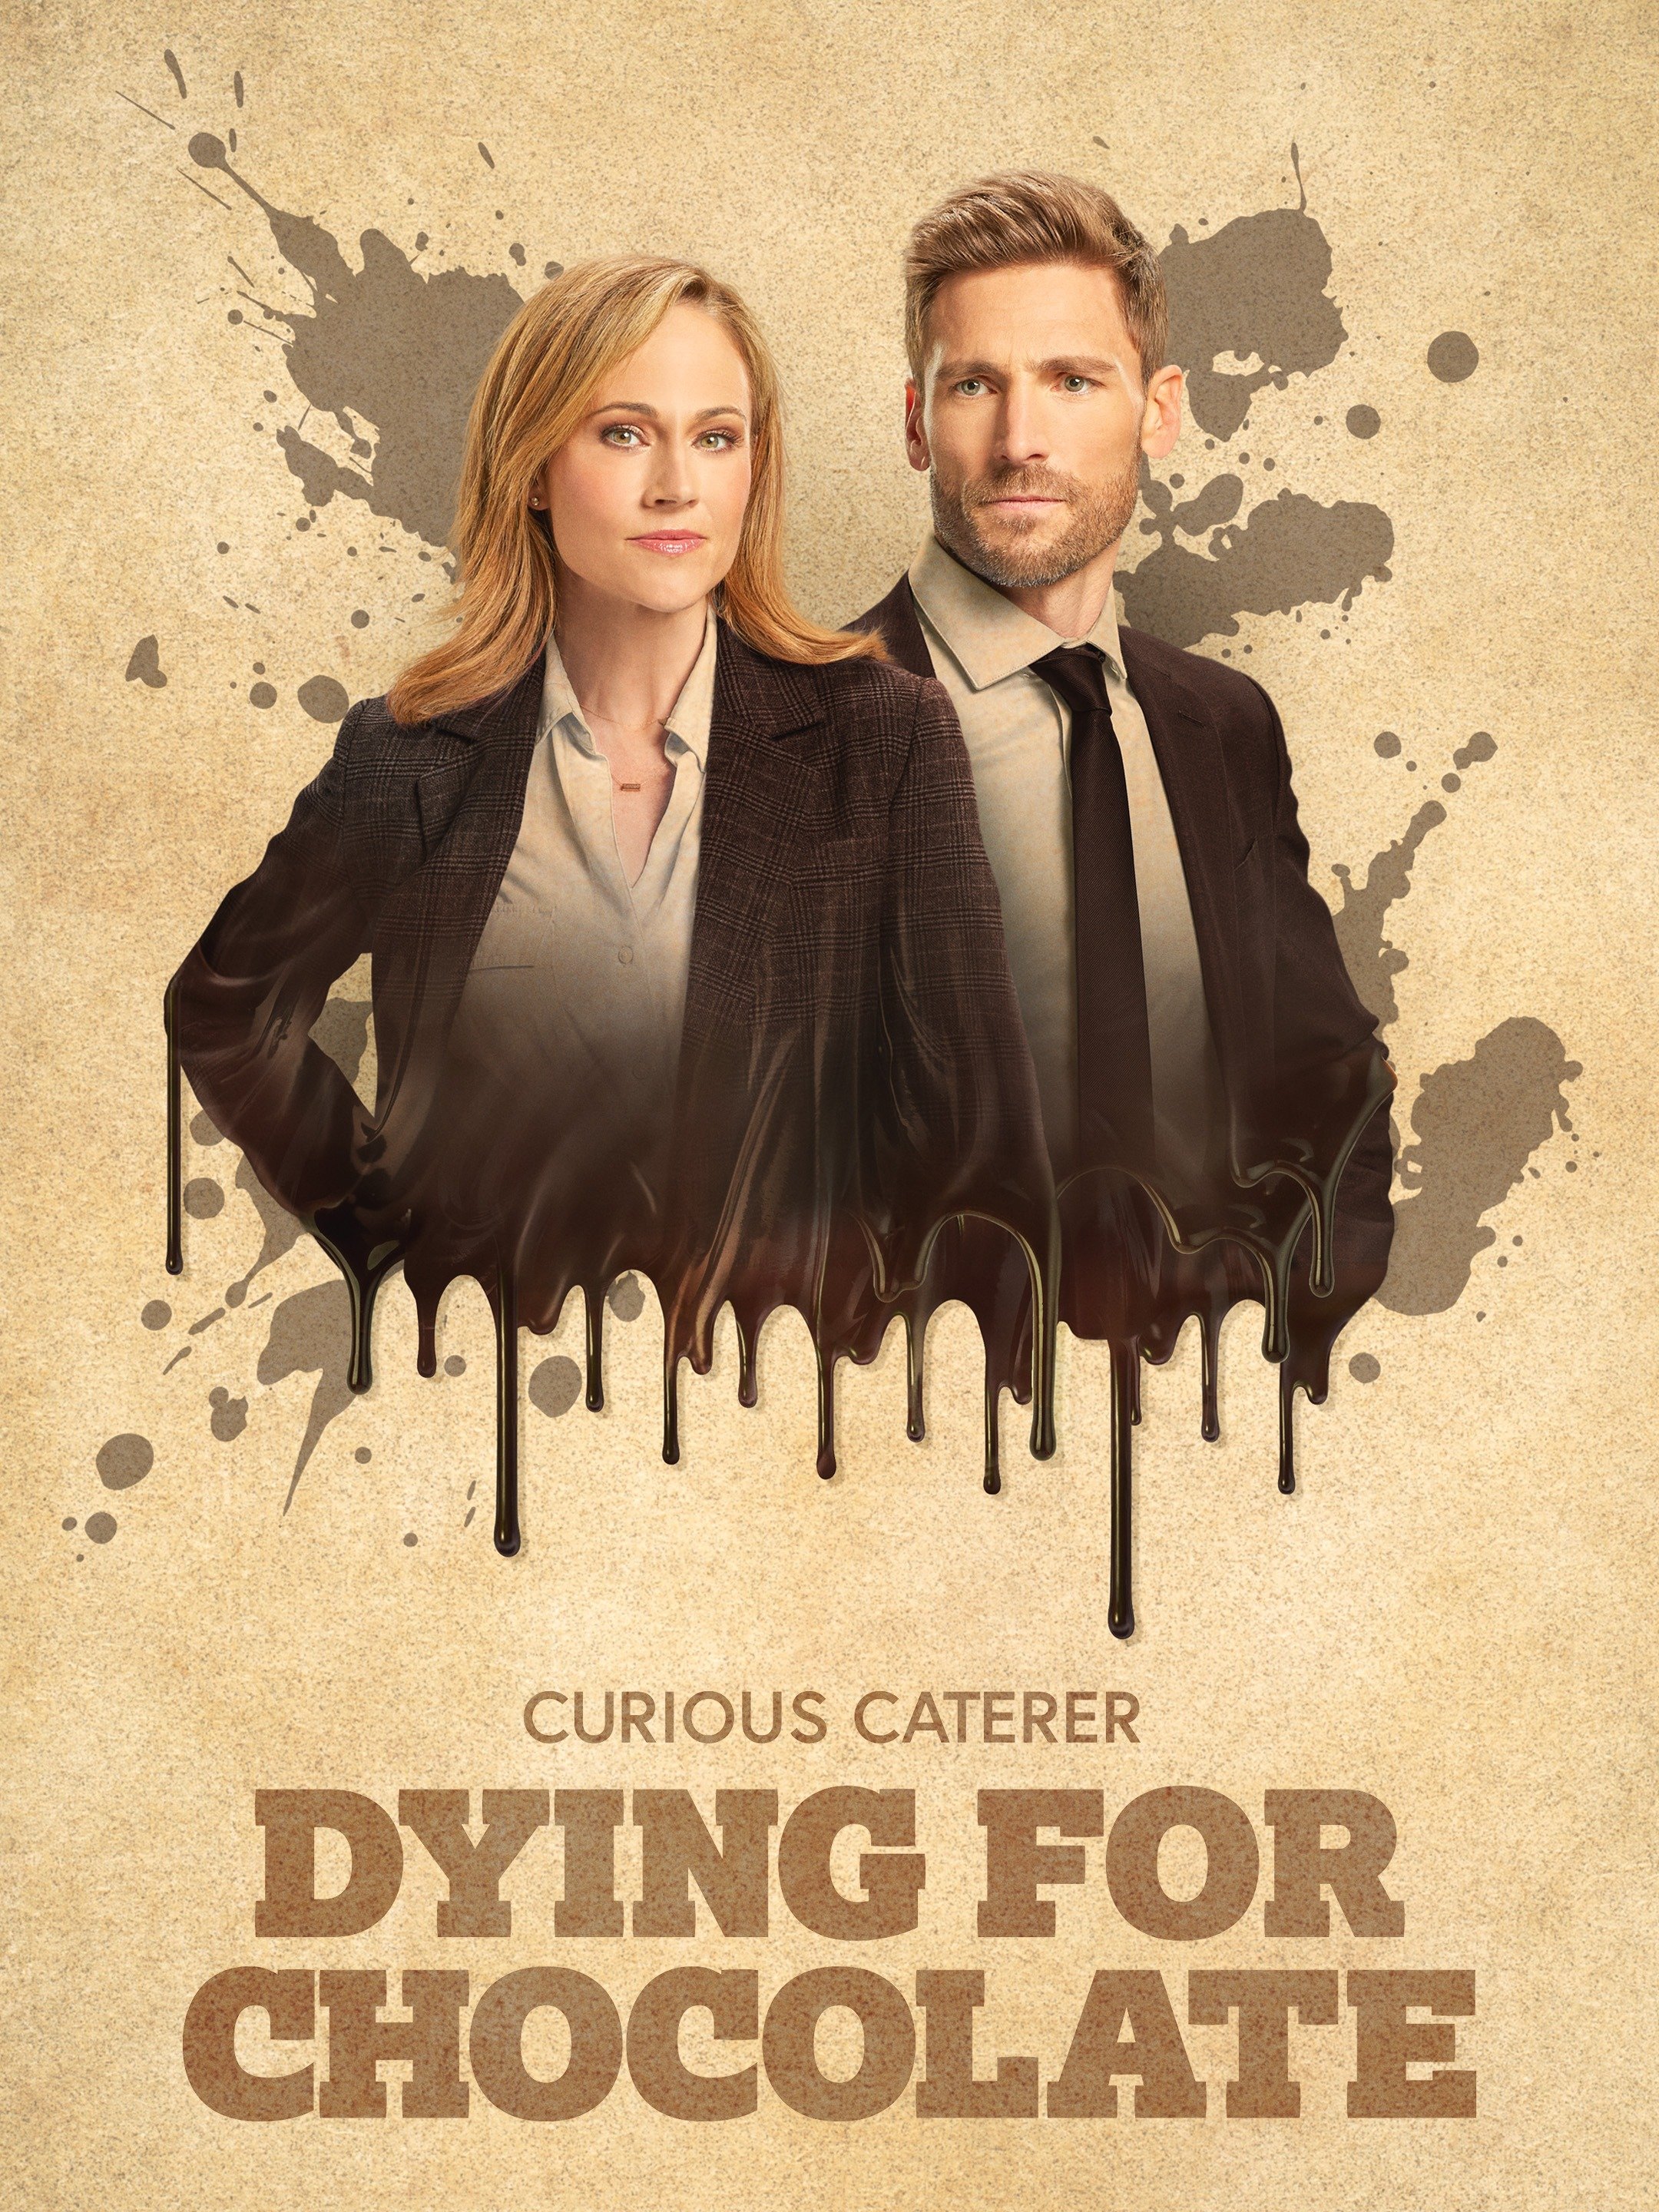 Nonton film Dying for Chocolate: A Curious Caterer Mystery layarkaca21 indoxx1 ganool online streaming terbaru